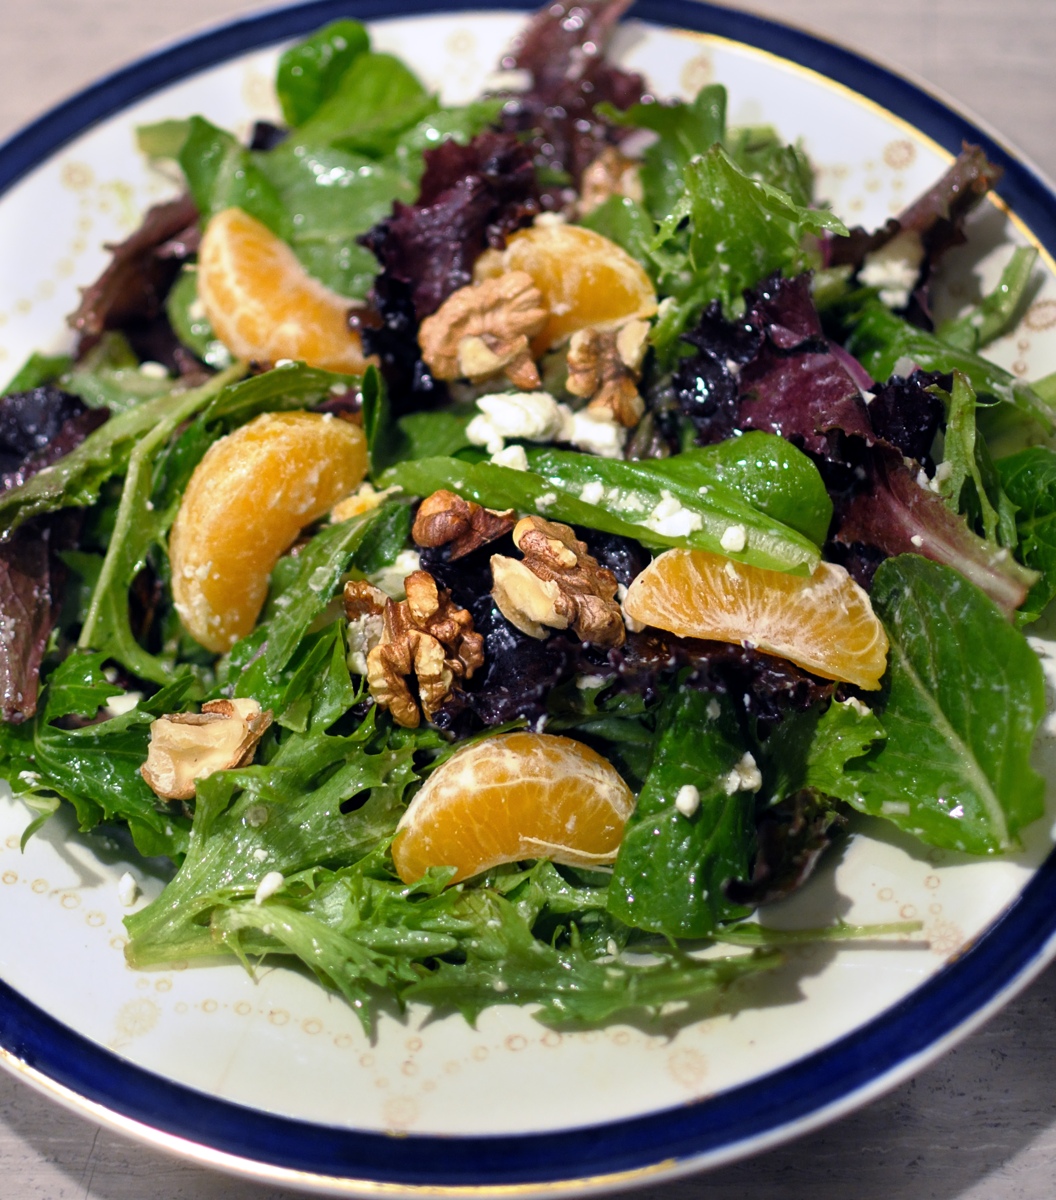 Clementine Goat Cheese Salad, Walnuts